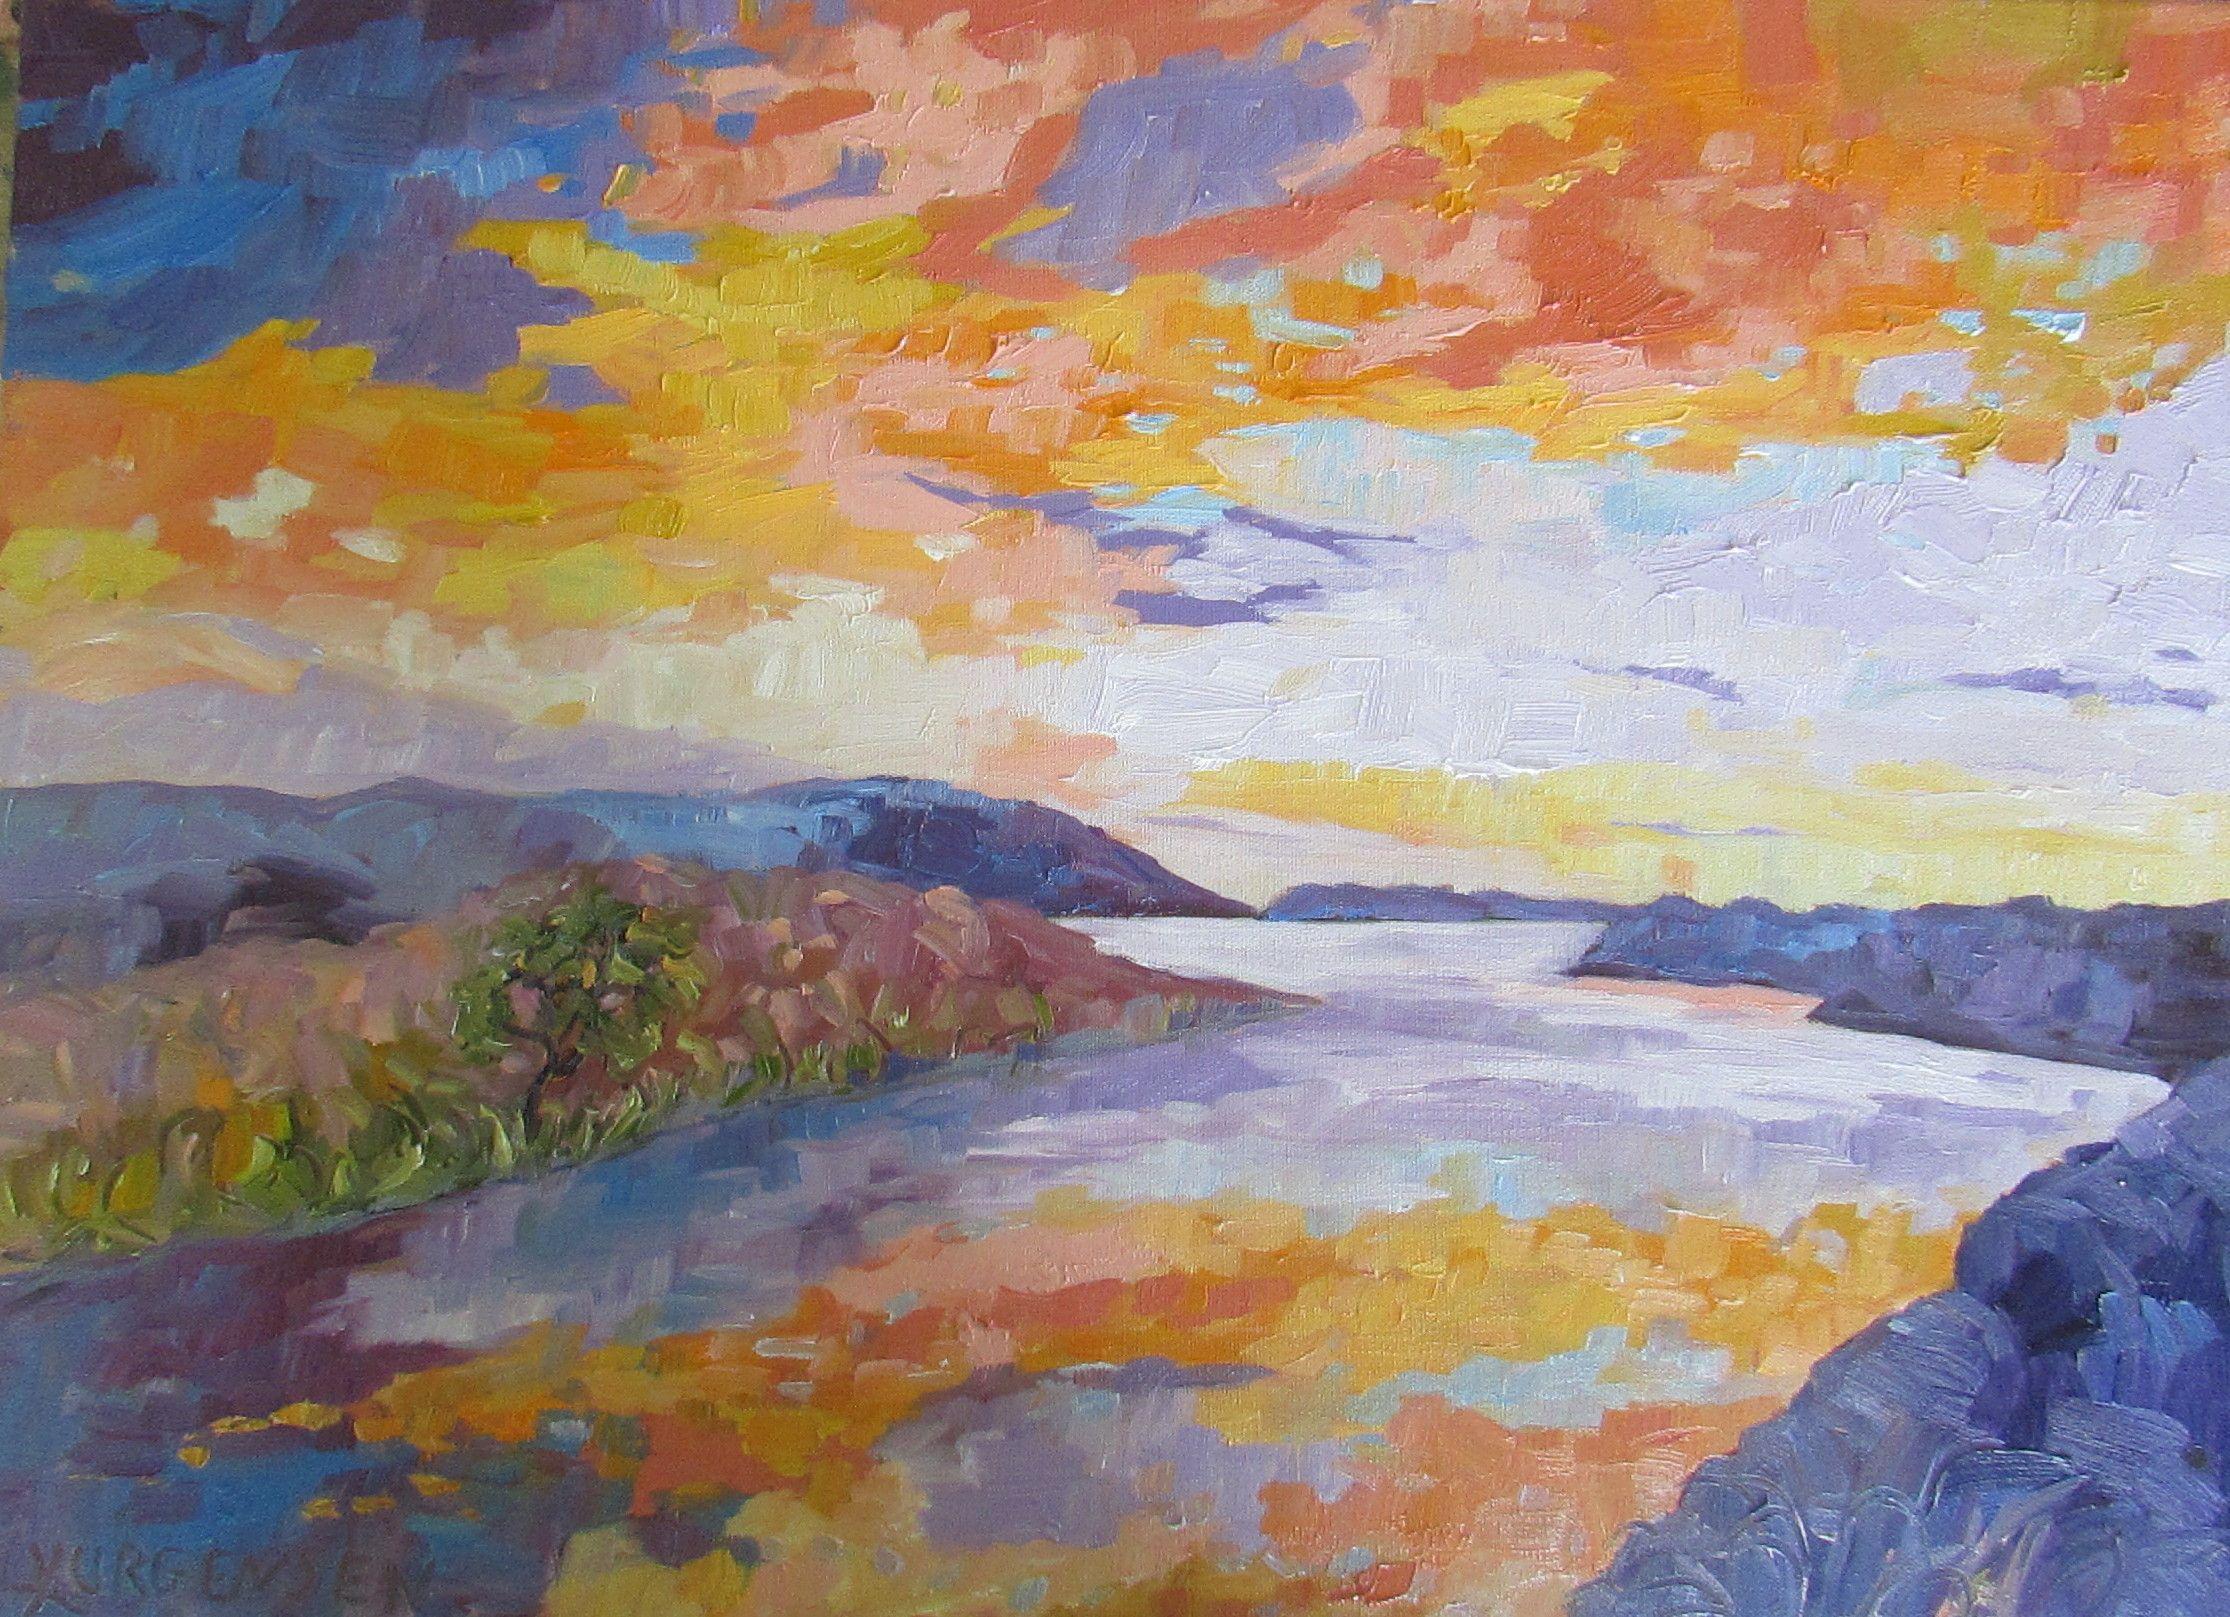 Storm clouds hover over the Cowichan Estuary creating beautiful reflections in the calm waters of the river.  The sides of the canvas have been painted to complete the look. This painting has a lot of soft lavenders and oranges that is hard to pick